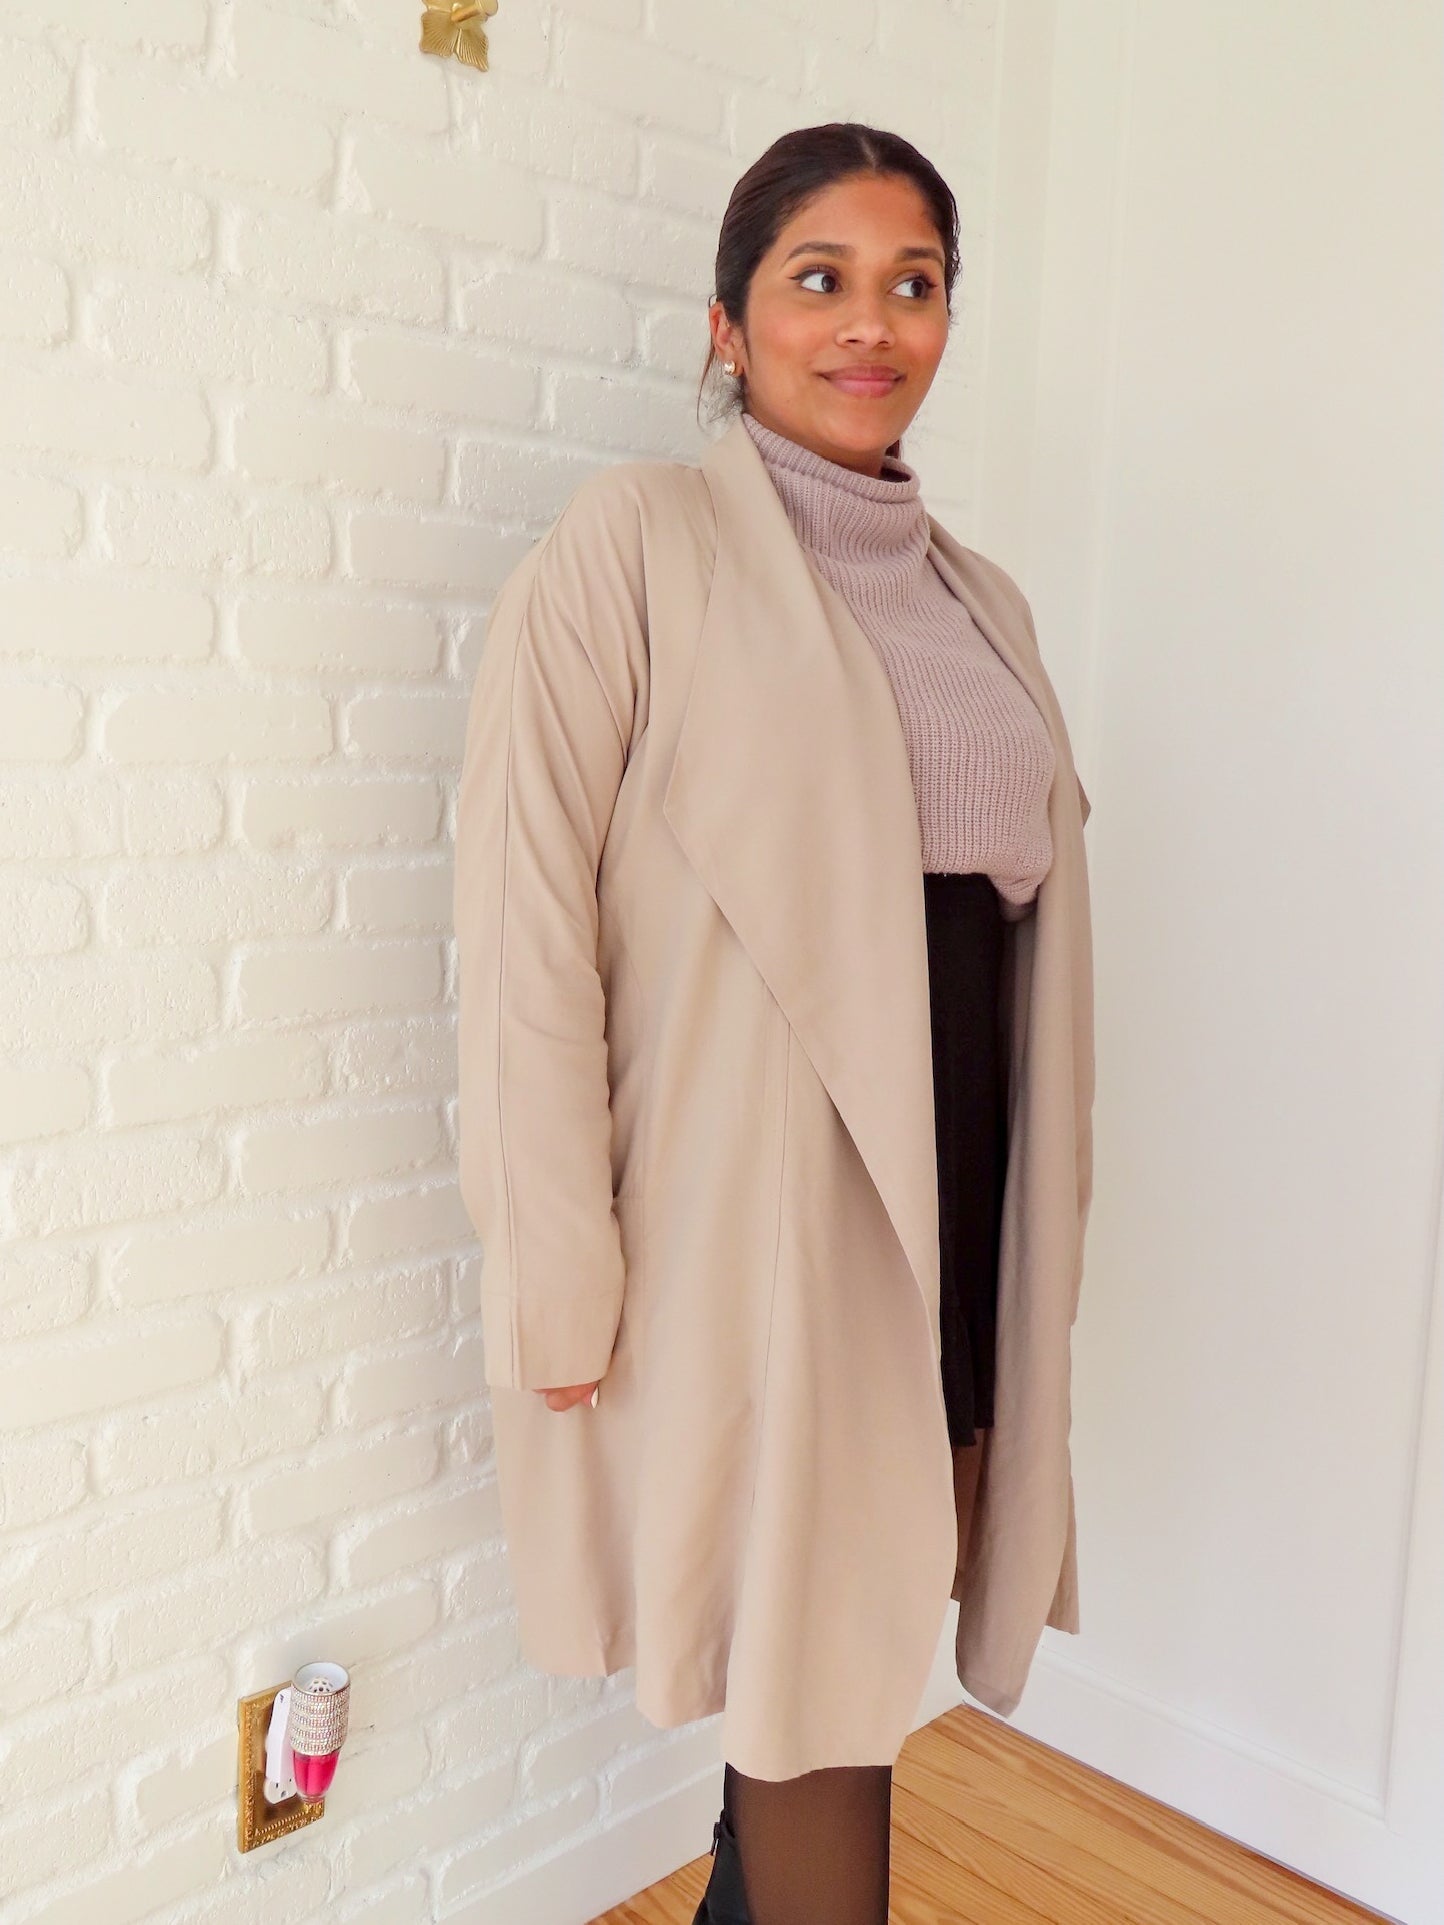 Tan Drape Front Duster Trench Coat